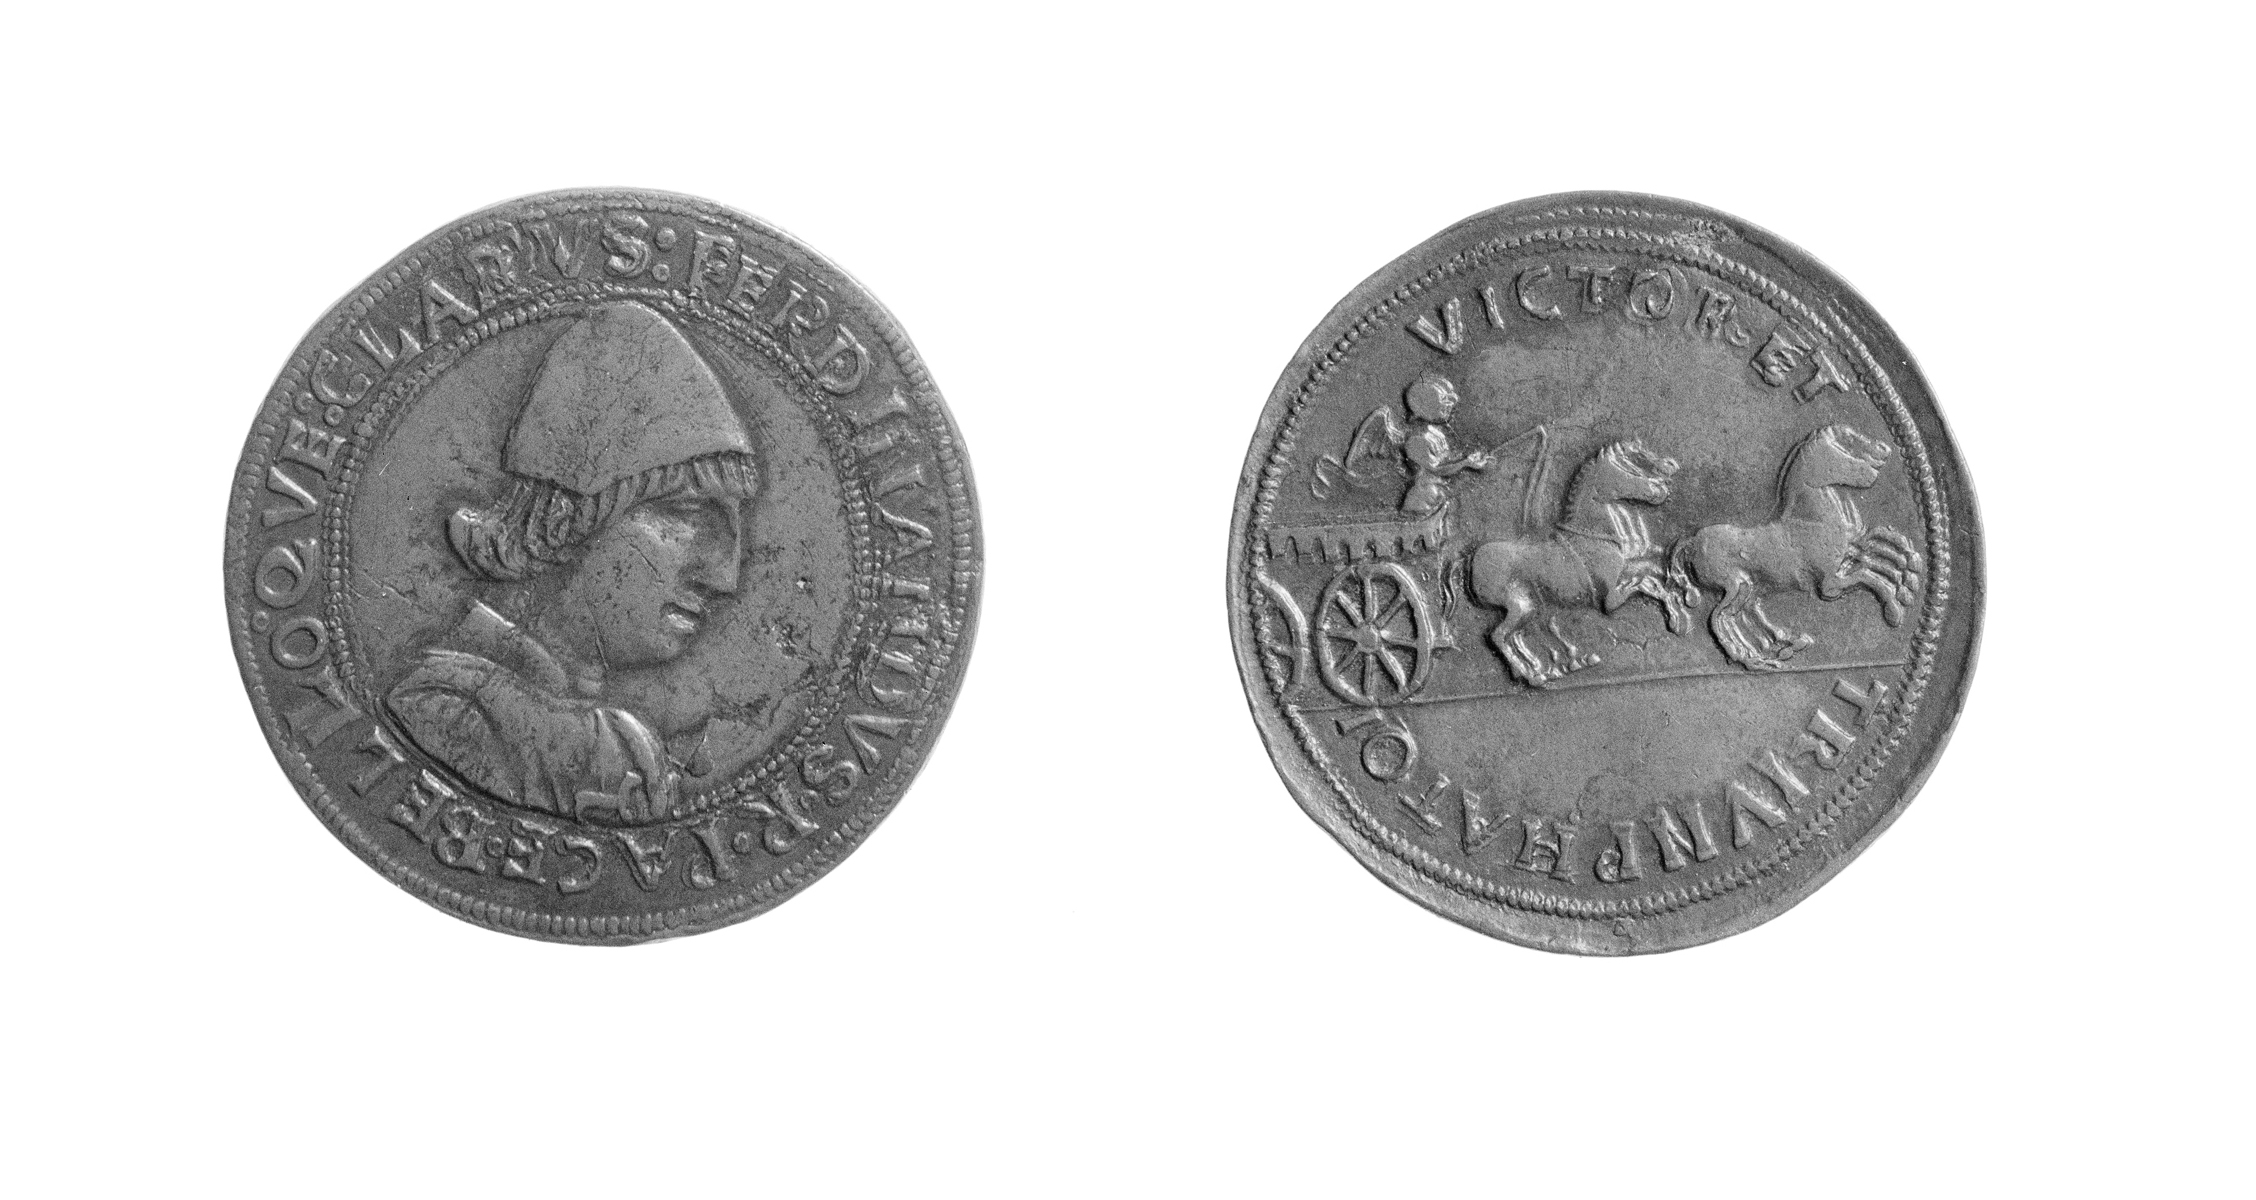 Coin by Liparolo. Left: Obverse. Bust of King Ferrante of Naples © Ashmolean Museum, University of Oxford. Right: Reverse. © Ashmolean Museum, University of Oxford.